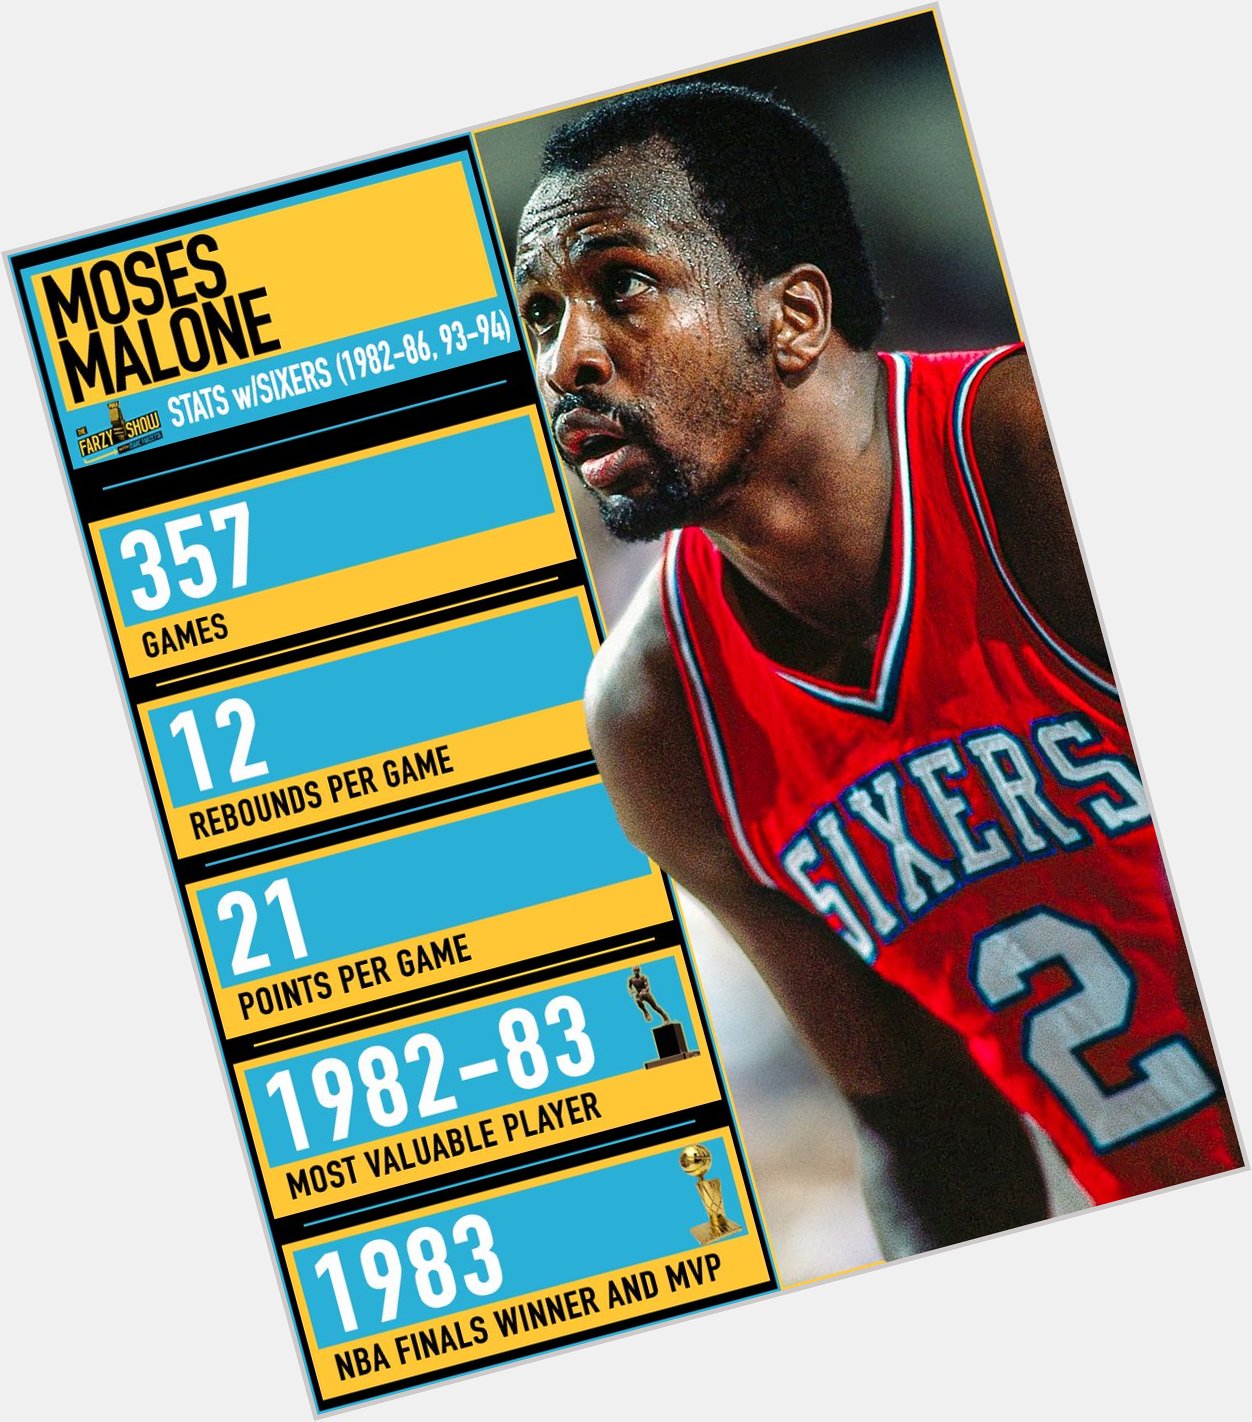 We wanted to wish the late Moses Malone happy birthday!   